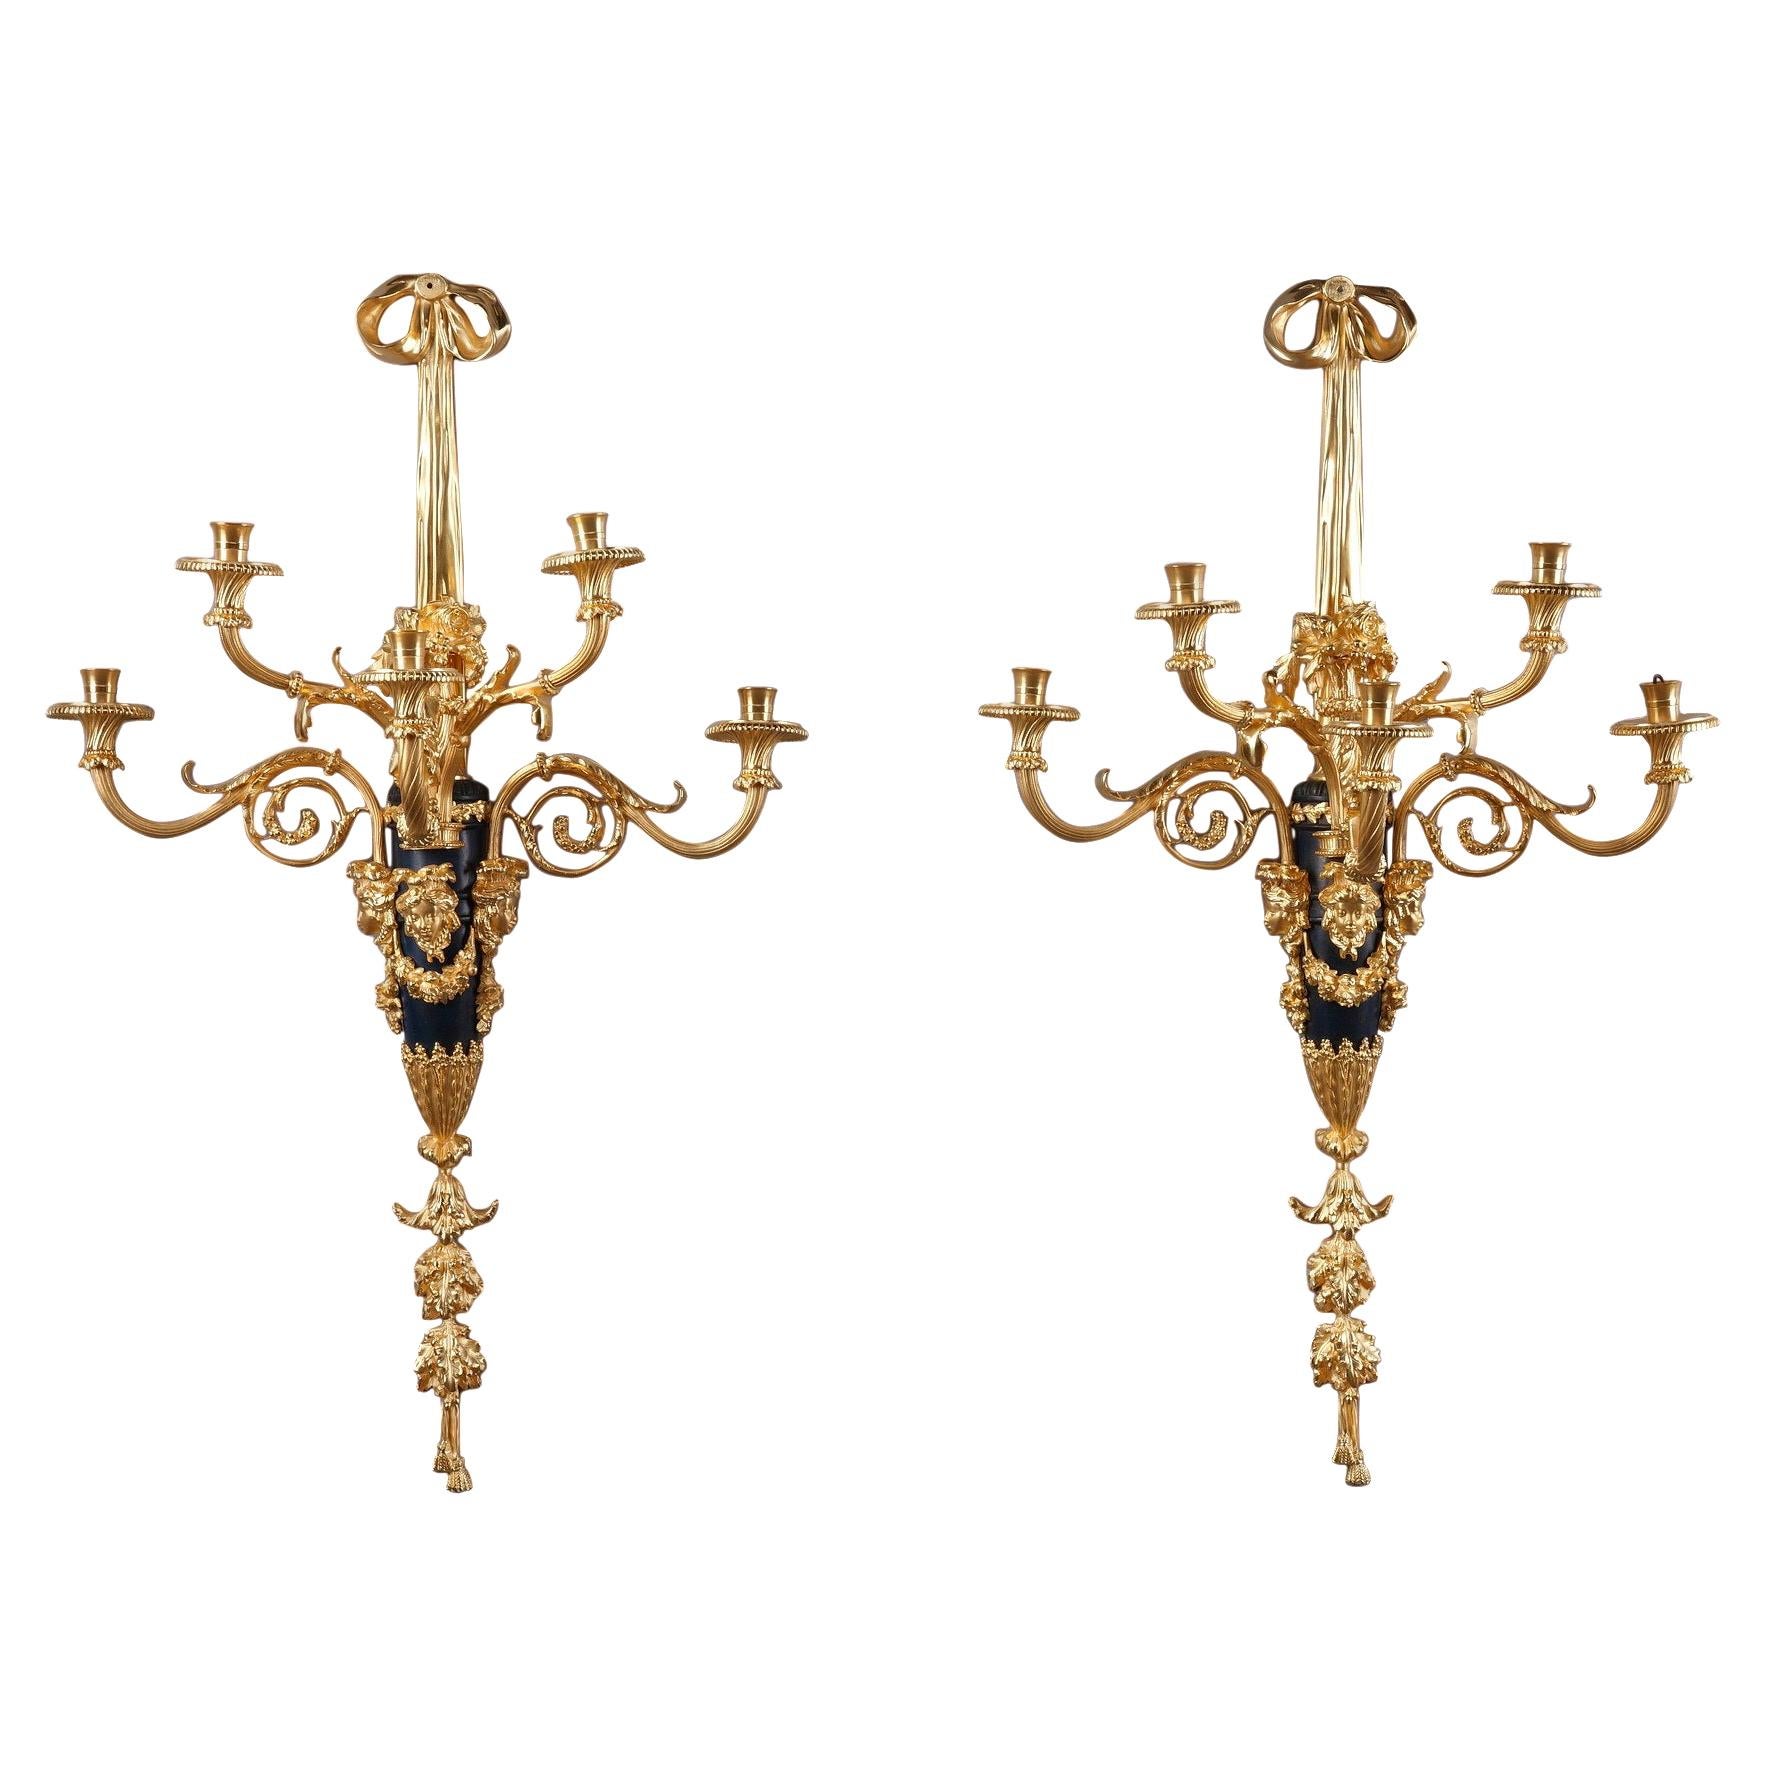 Monumental Louis XVI Style Wall Sconces after Thomire